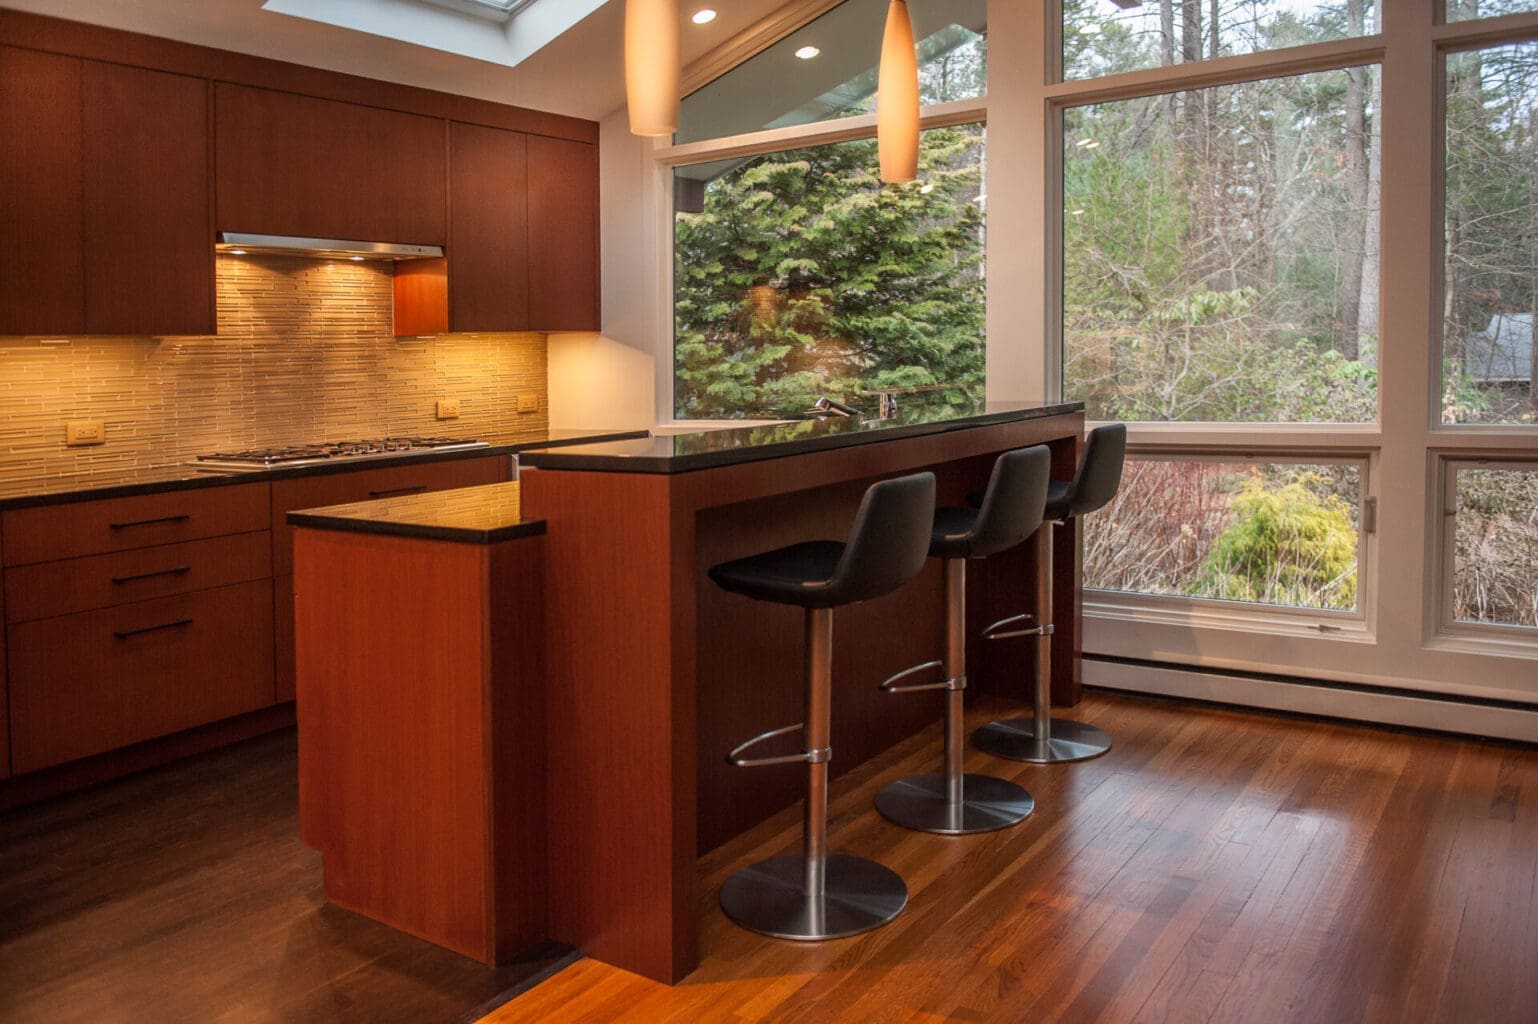 A photo of a mid-century modern kitchen with cherry wood cabinetry and island, black stone countertops, and stainless steel appliances.